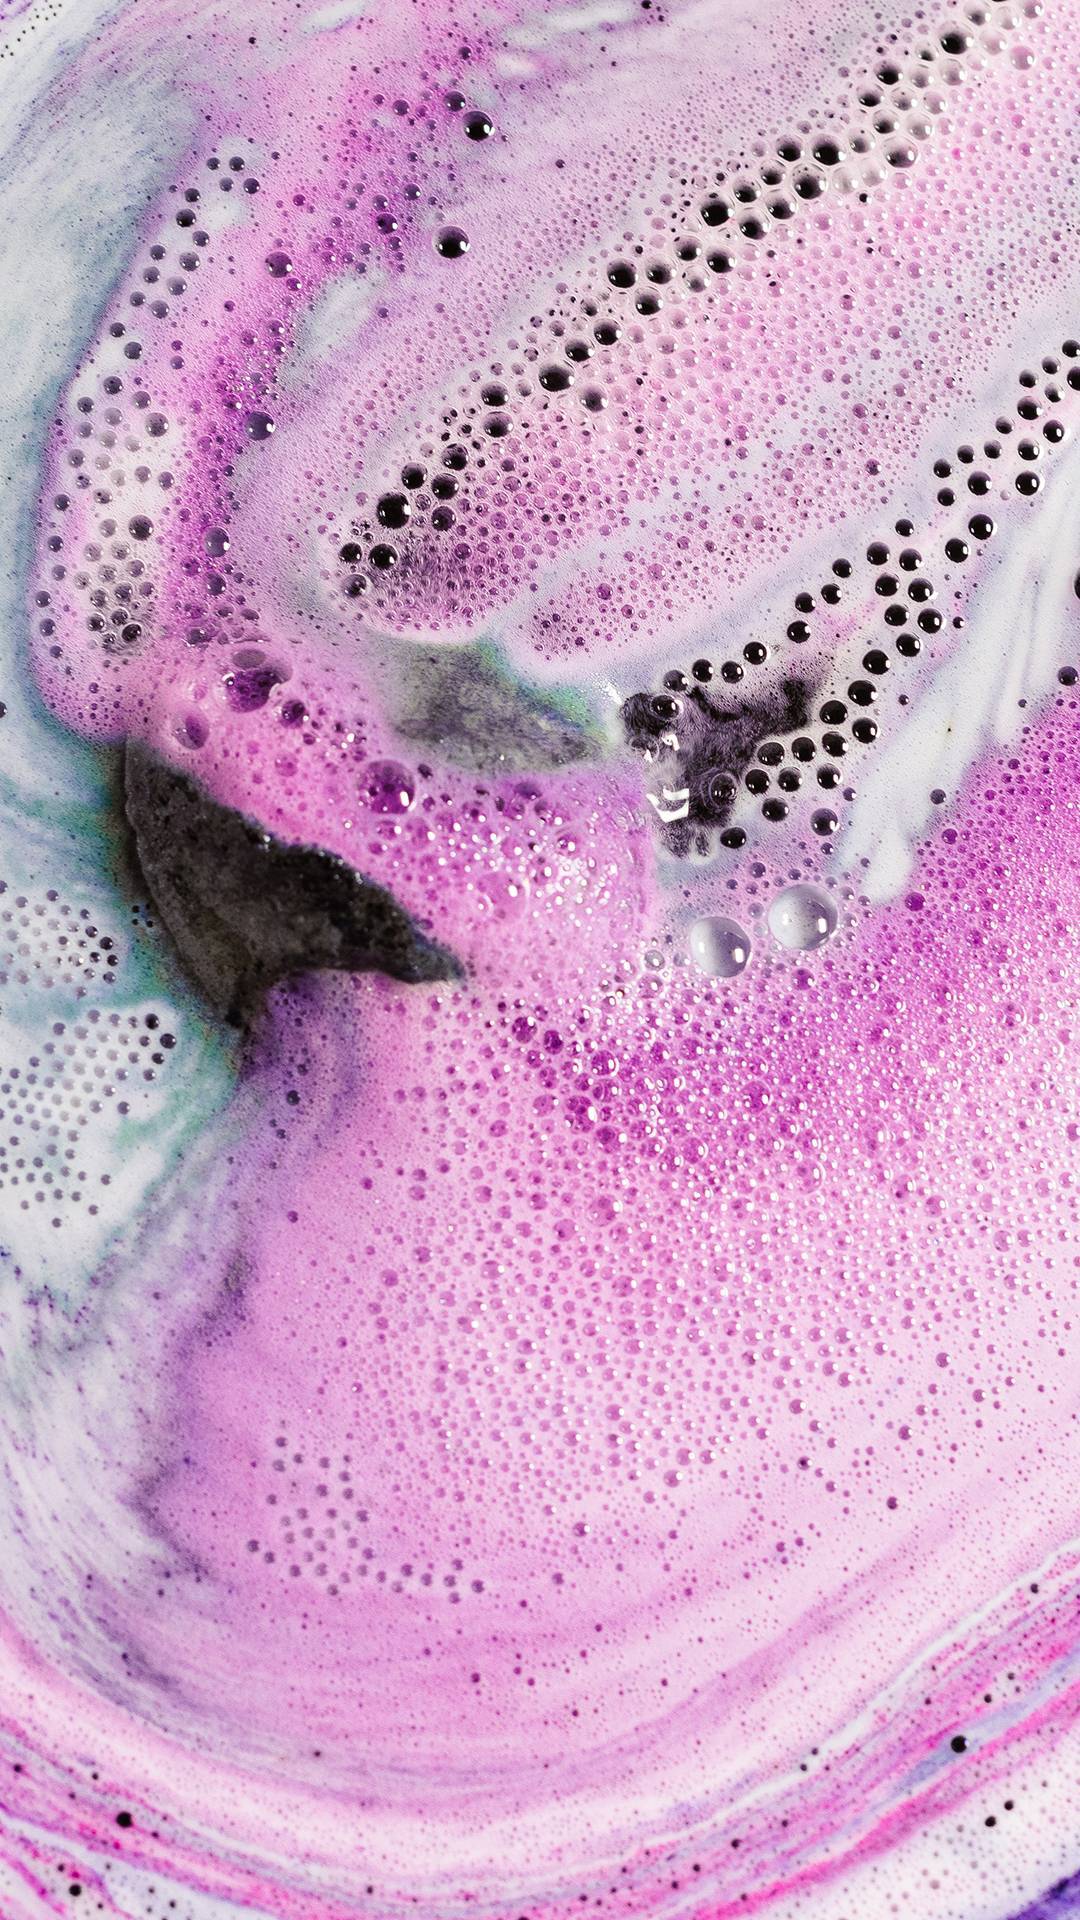 The Black Rose bath bomb is slowly dissolving creating a velvety galaxy pattern on the water surface made of pink, blue and purple foam above dark bath water. 